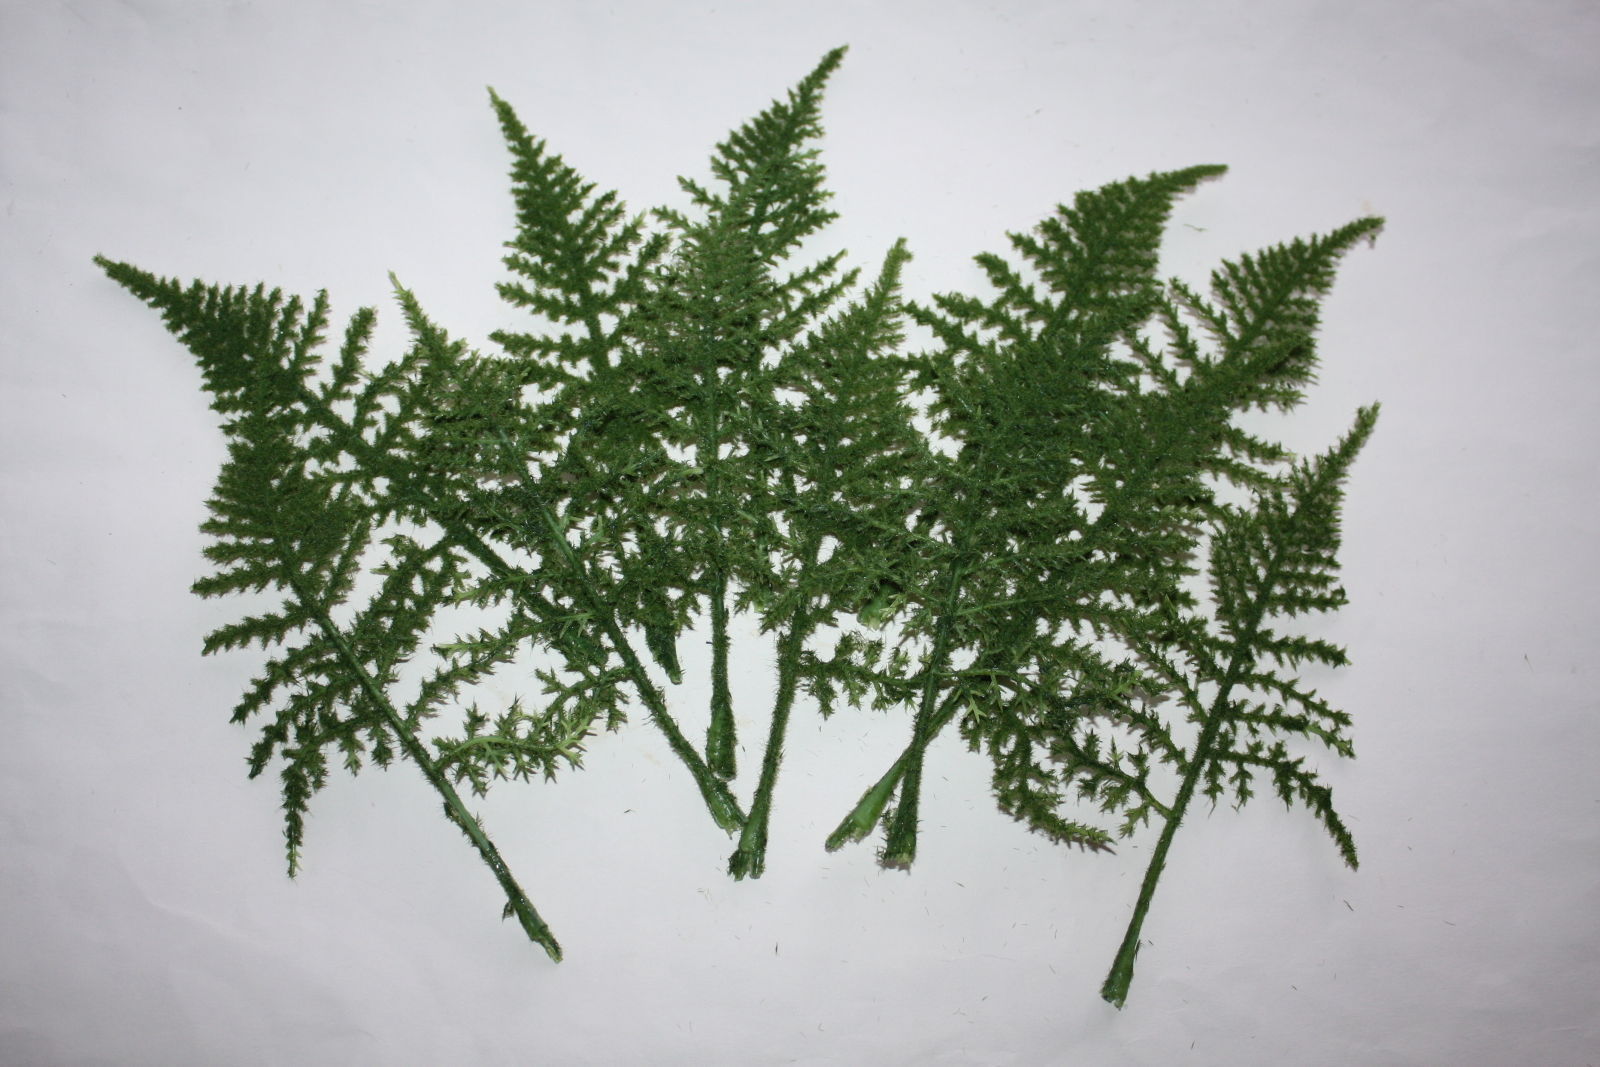 50 ASPARAGUS GREEN FERN LEAVES ARTIFICIAL BUTTONHOLES FLOWERS WEDDING CRAFTS 